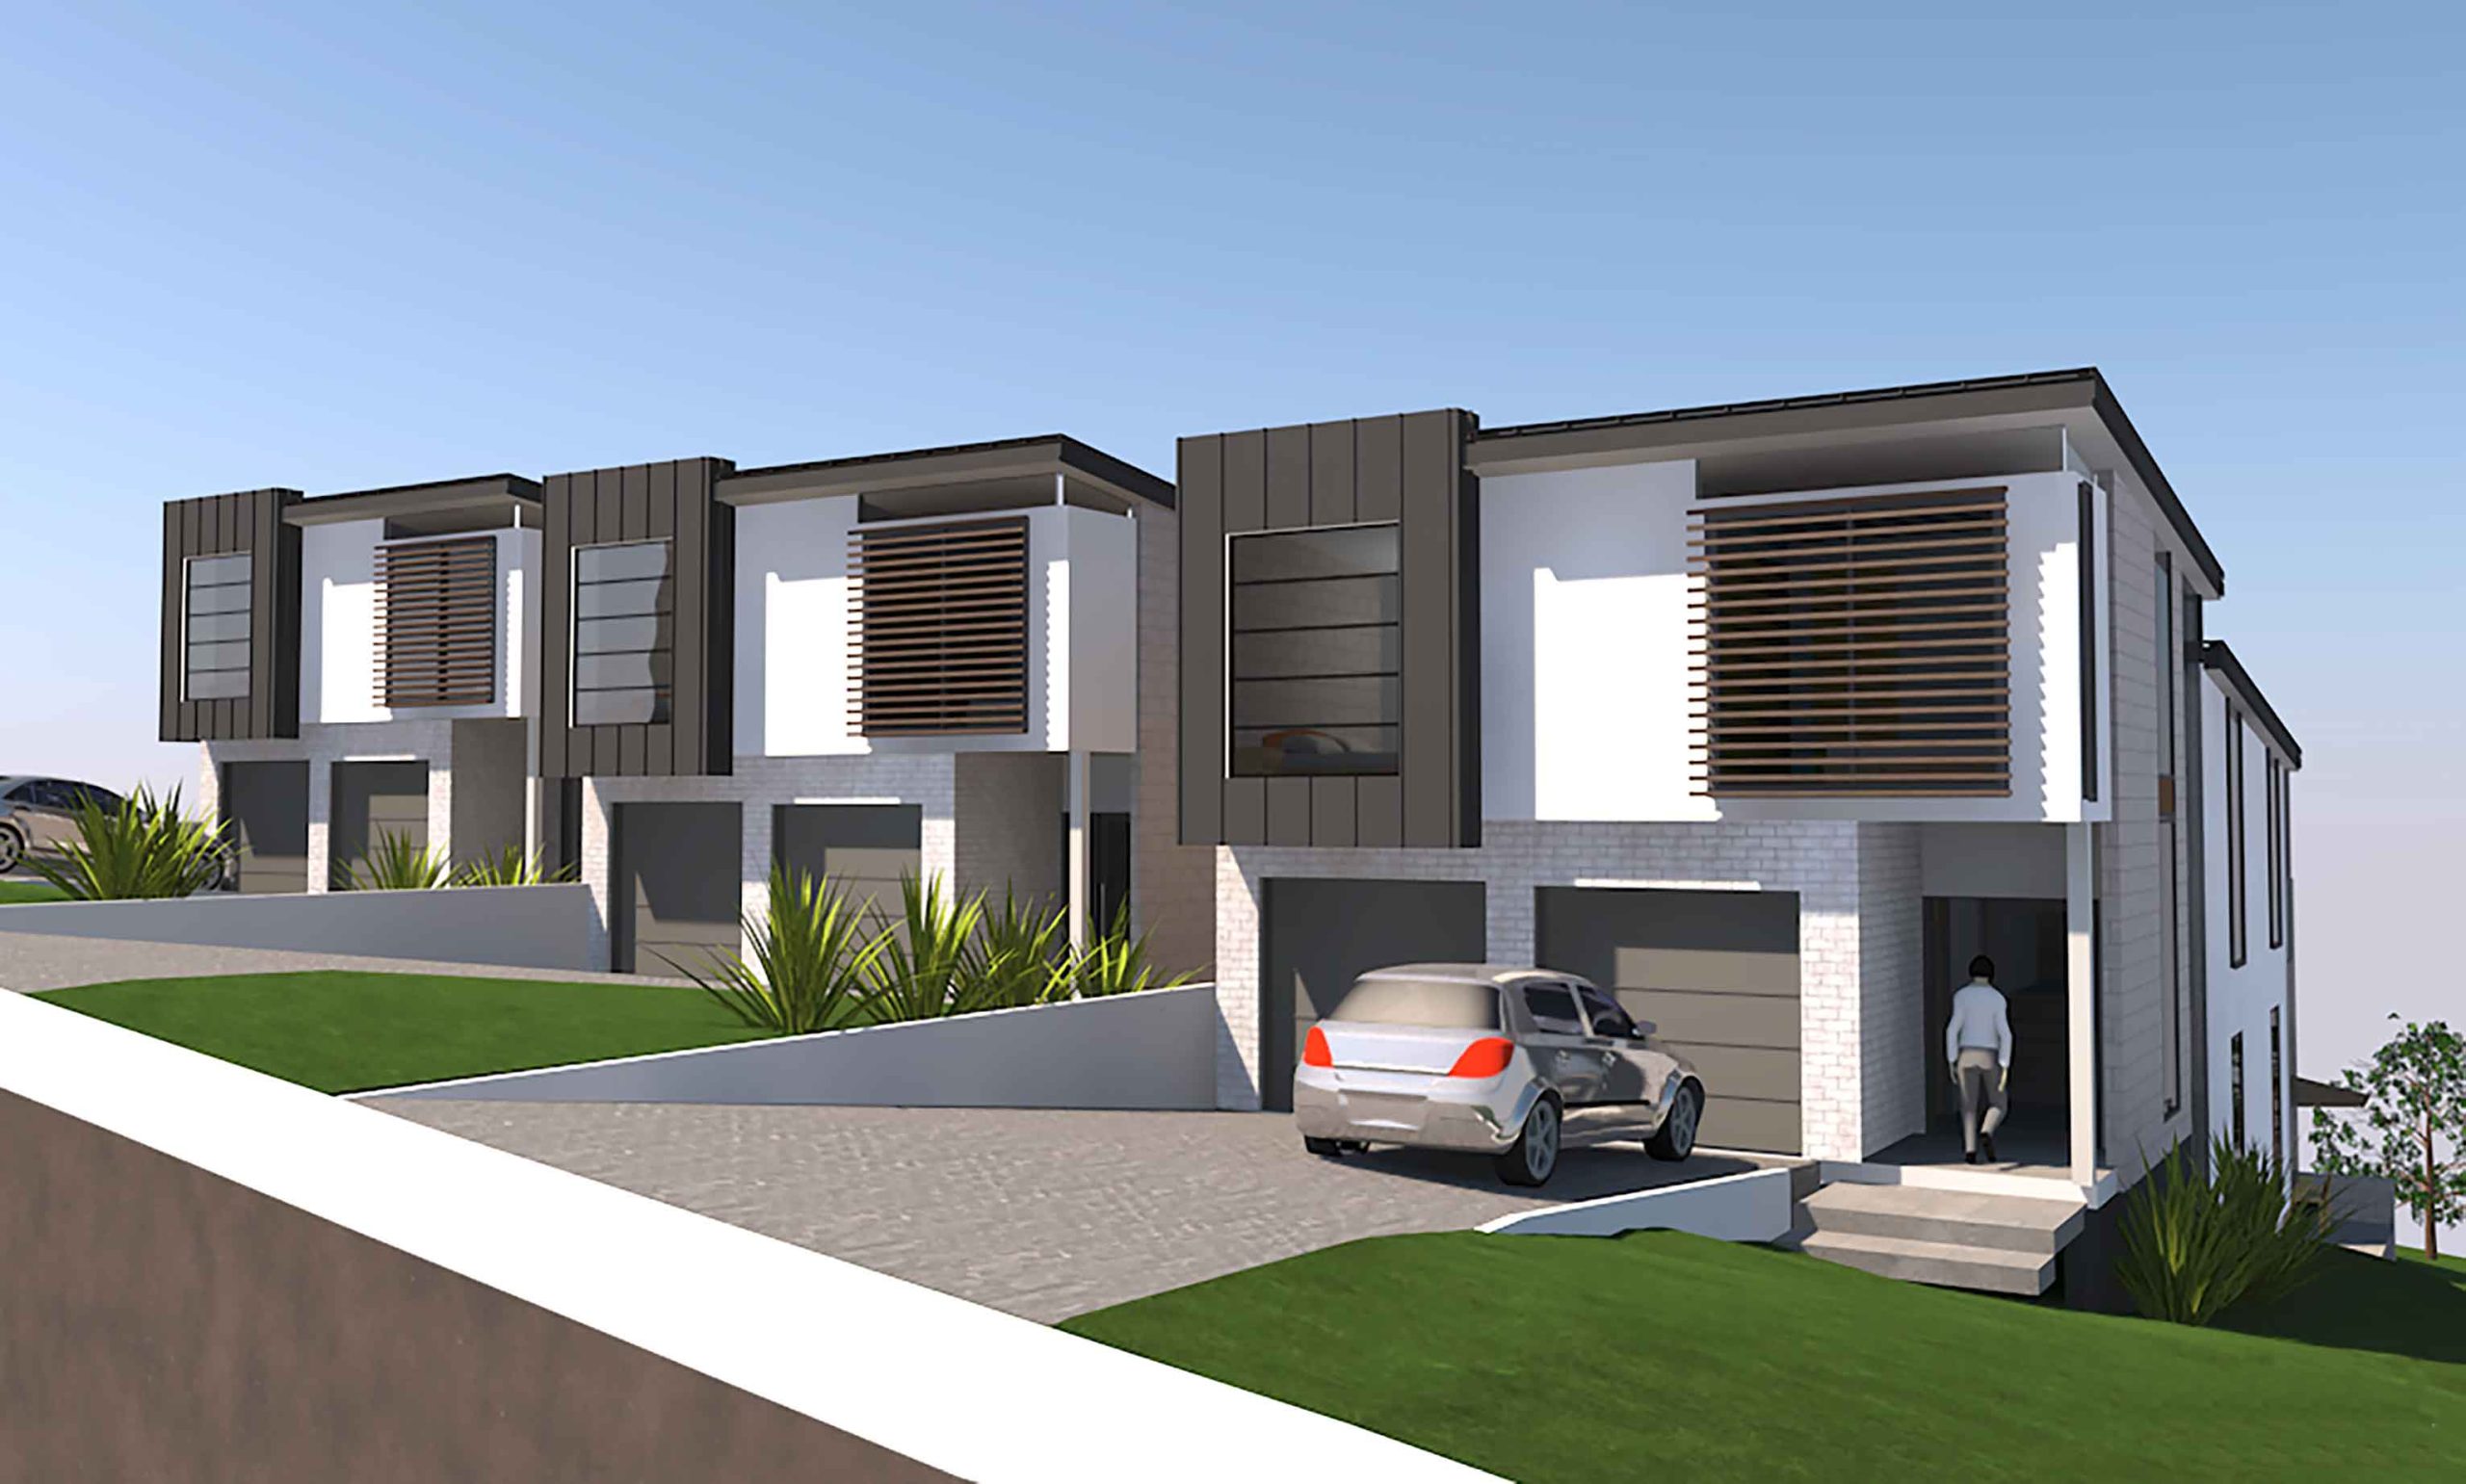 architects render of a row of houses with cars parked in front of them.